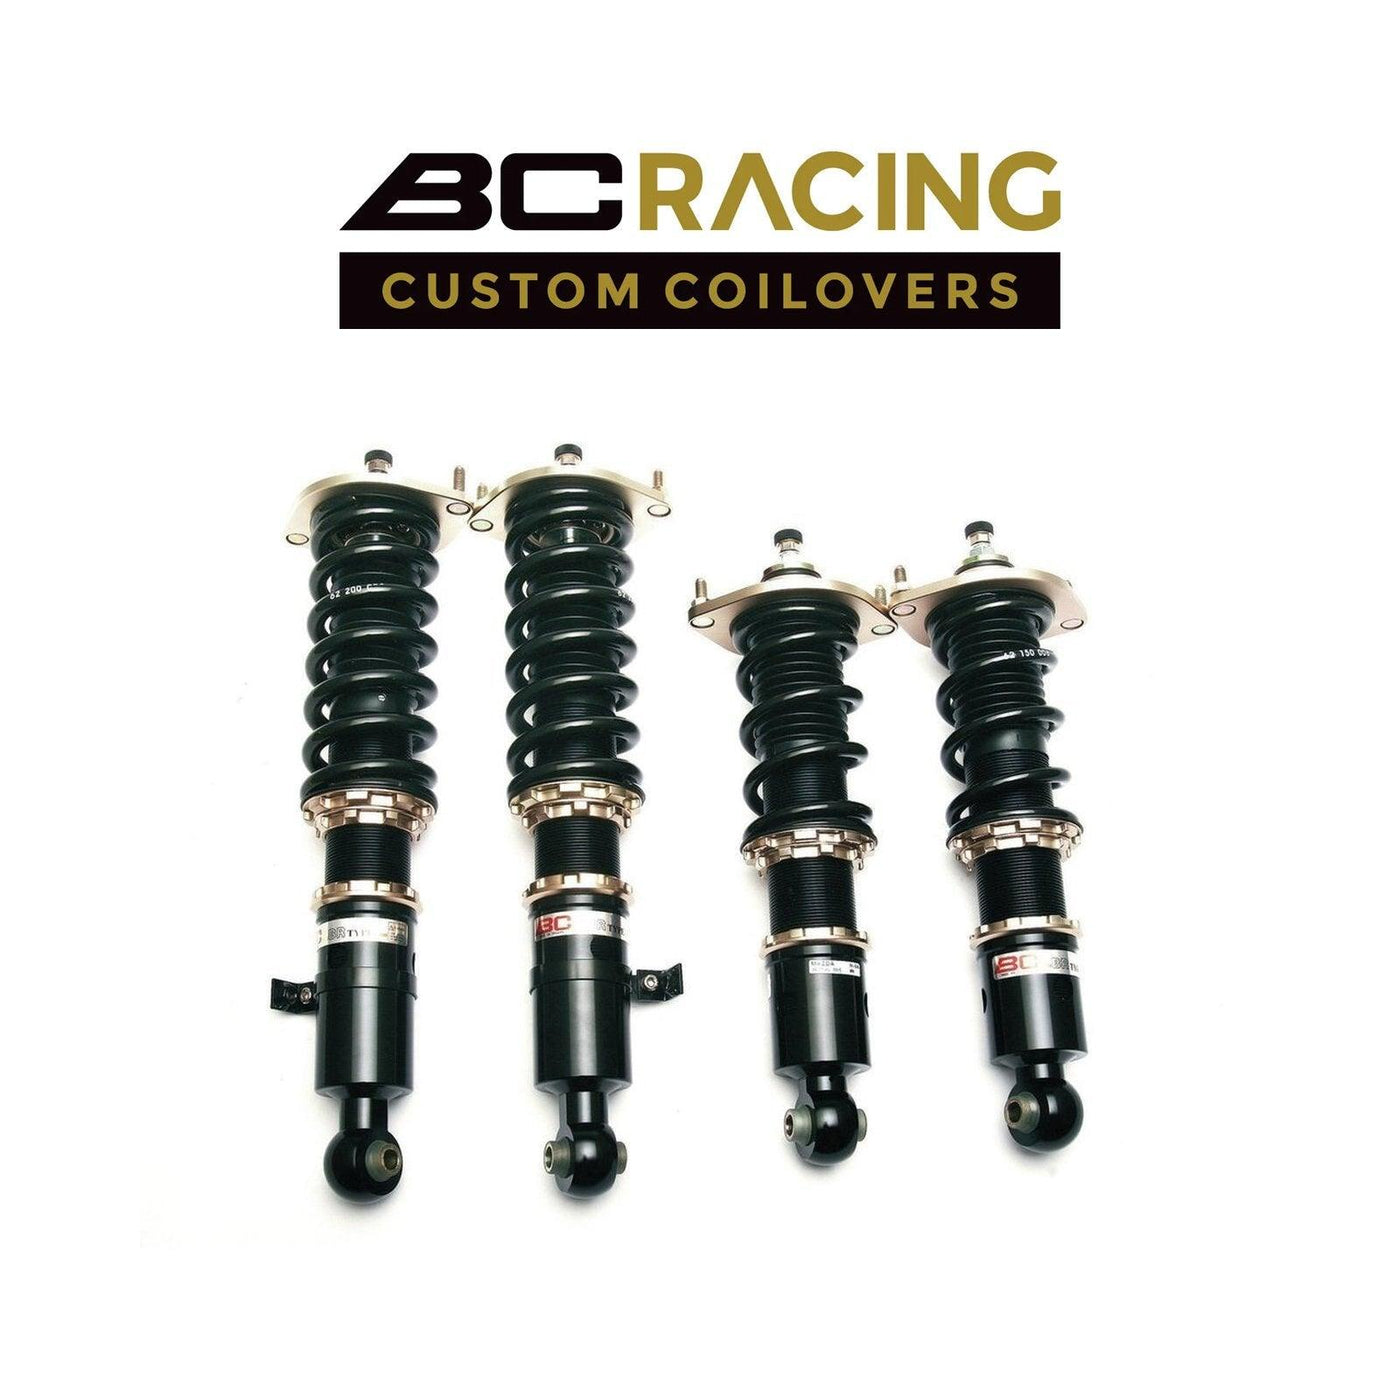 BC Racing Coilovers 2002-2006 HONDA CR-V FWD/AWD - Attacking the Clock Racing